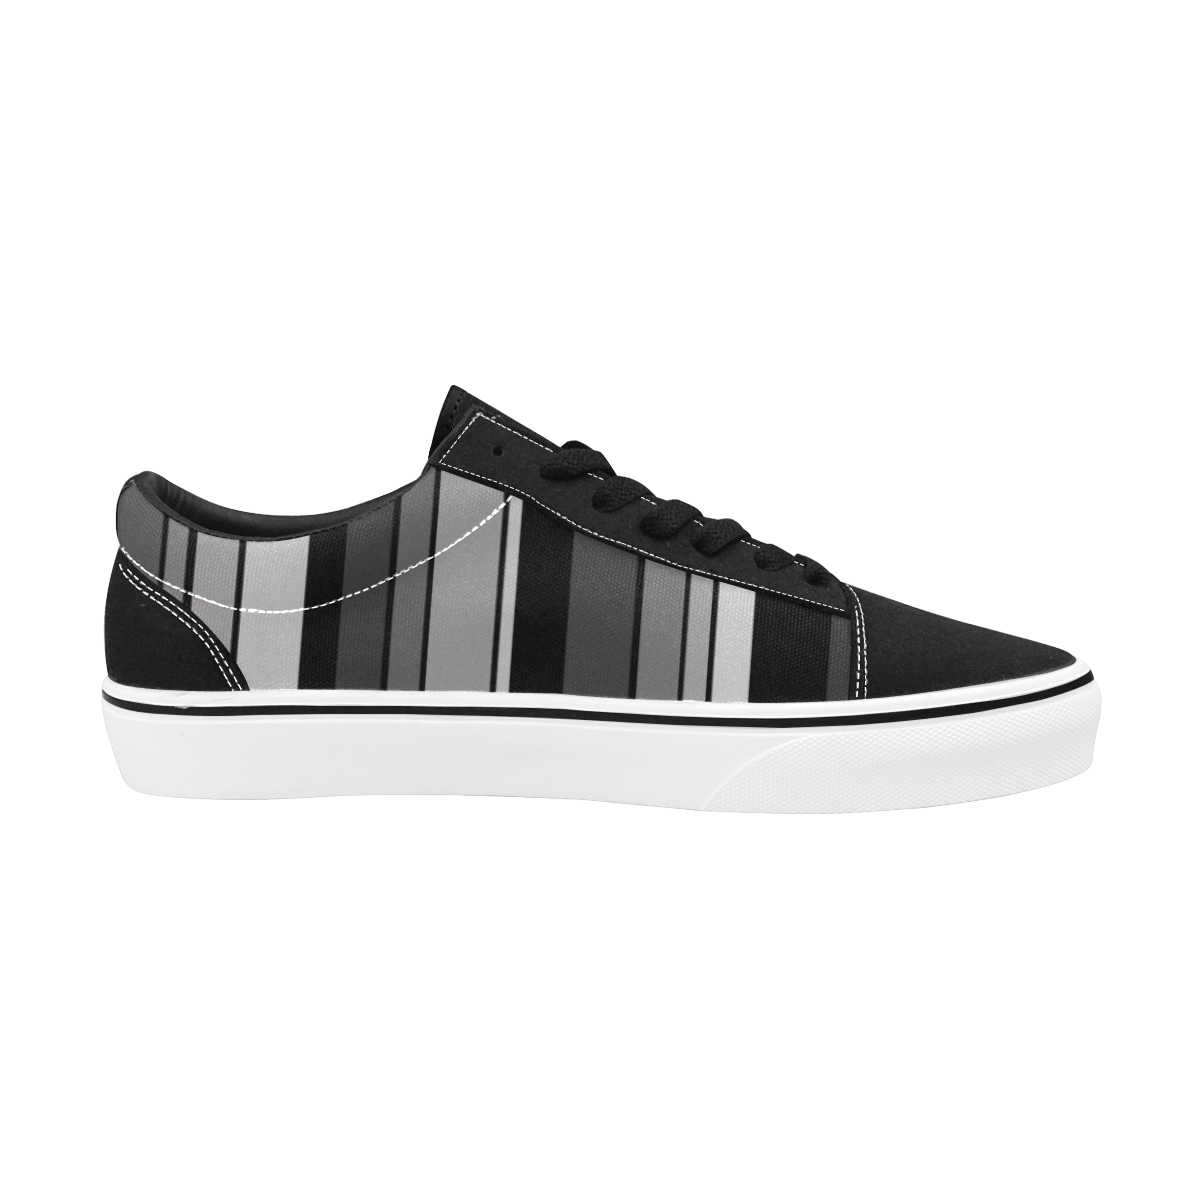 from black to grey Men's Low Top Skateboarding Shoes (Model E001-2)